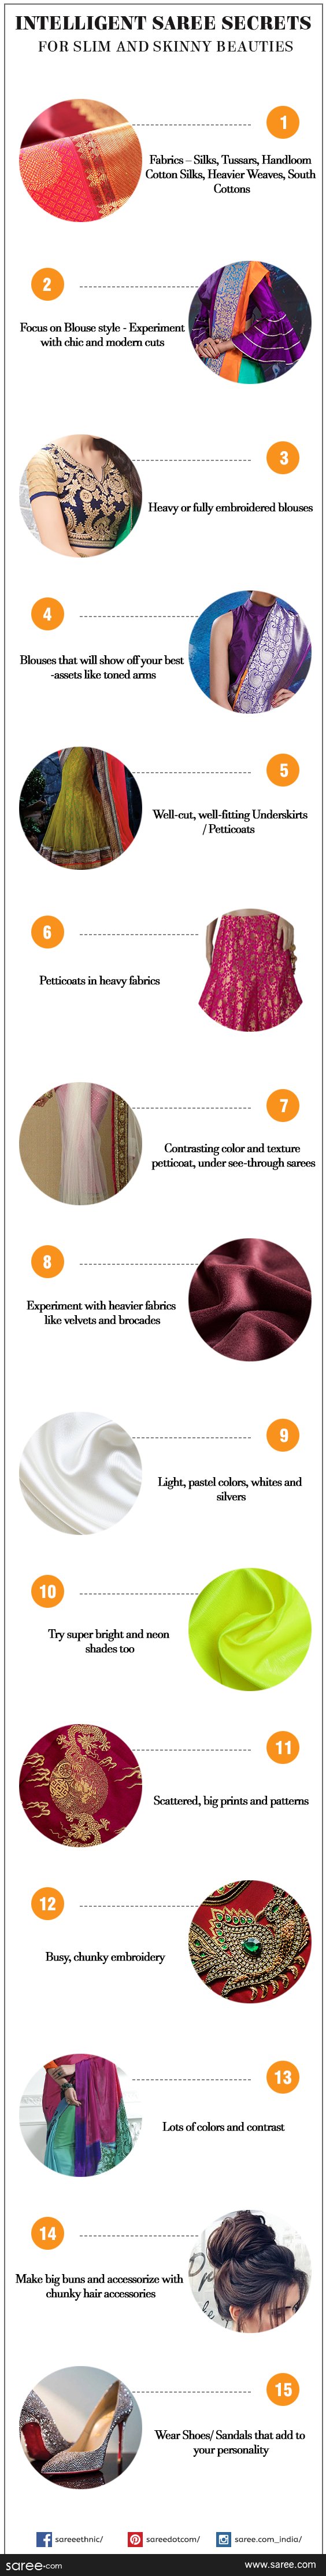 Saree style for slim and skinny women - infographic